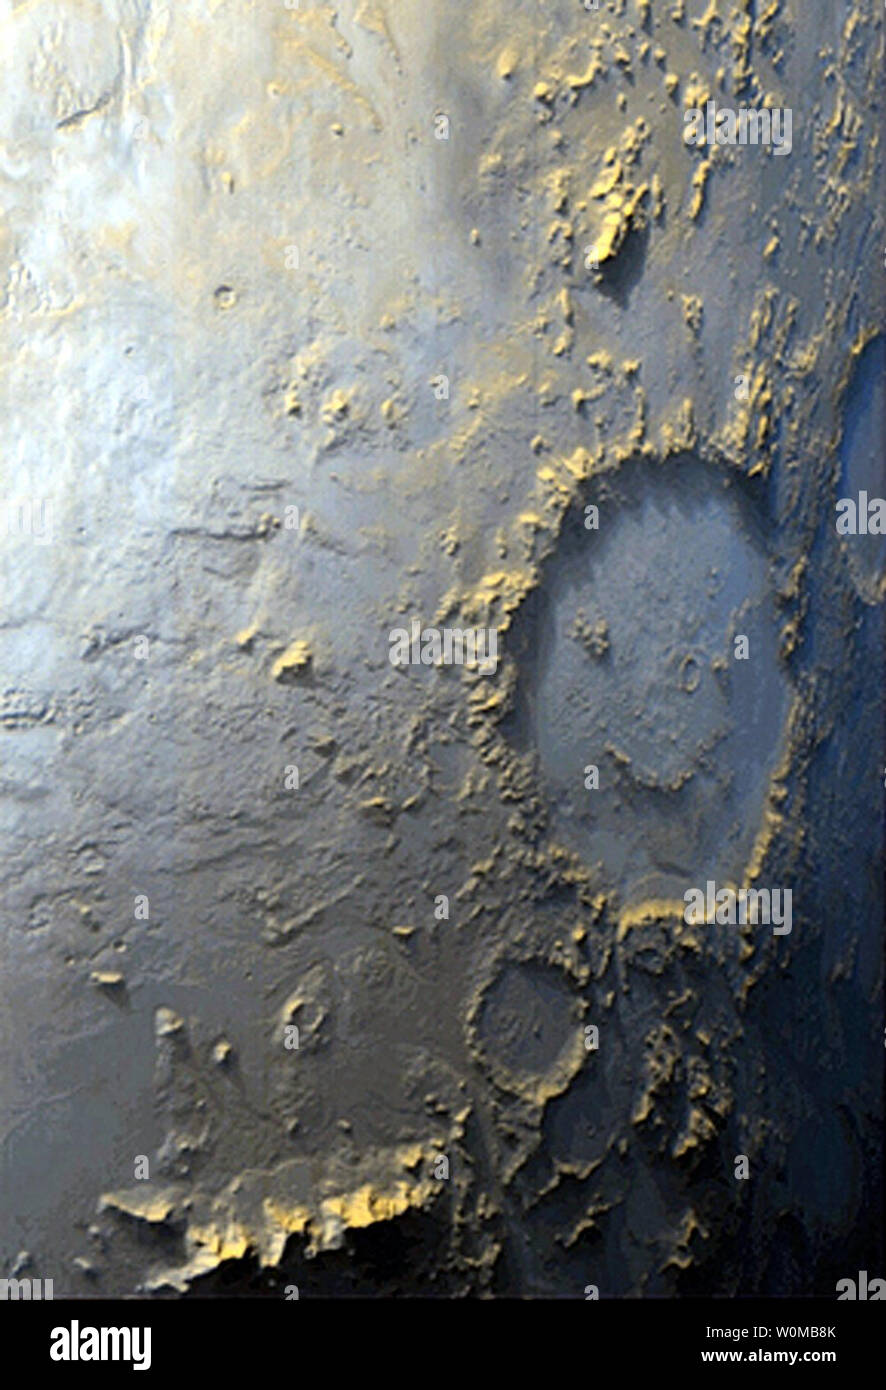 What scientists call the 'Happy Face' on the surface of Mars is pictured in a March 12, 1999 Mars Global Surveyor photo. This crater is officially known as Galle Crater, and it is about 215 kilometers (134 miles) across. NASA celebrates the 50th anniversary of the Space Age marked by the October 4, 1957 launch of Sputnik, the world's first artificial satellite, made by the Soviet Union. (UPI Photo/NASA/FILES) Stock Photo